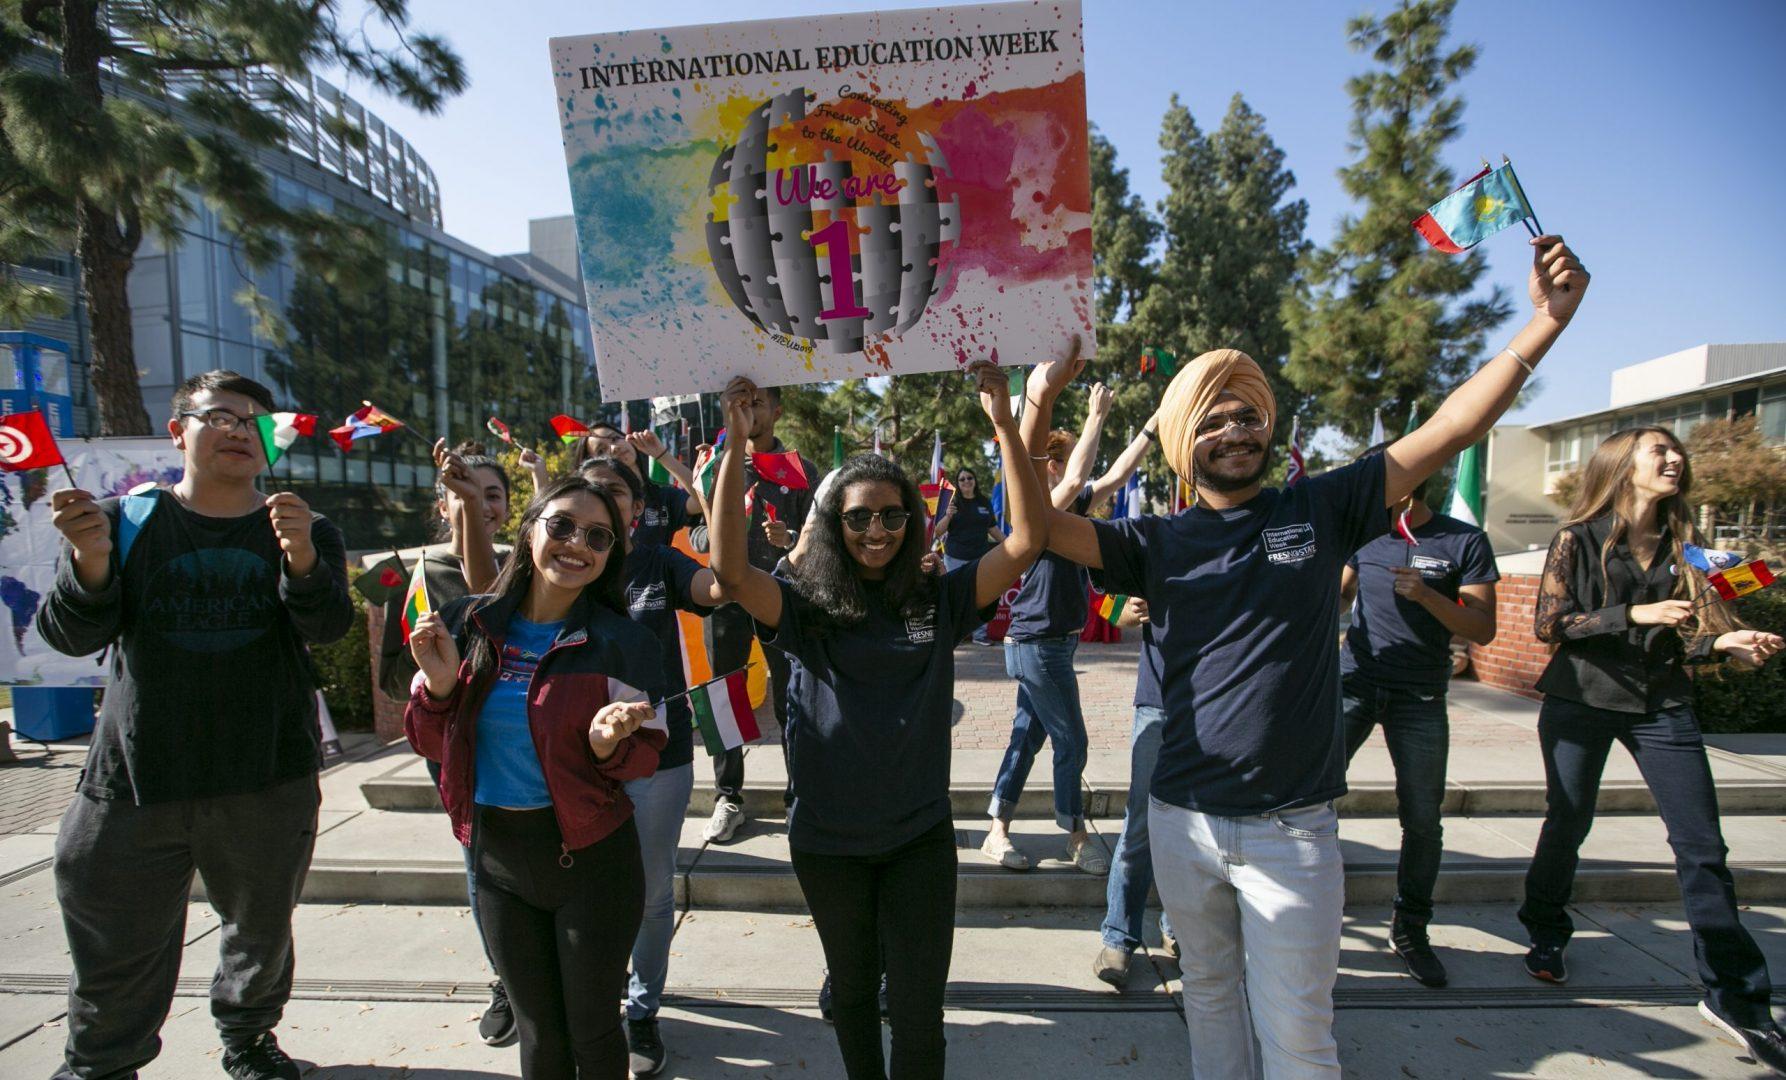 Students gather together to kick off International Education week as part of a flash mob to celebrate cultural diveristy on campus near the free speech area on Monday, Nov. 18, 2019. (Larry Valenzuela/The Collegian)